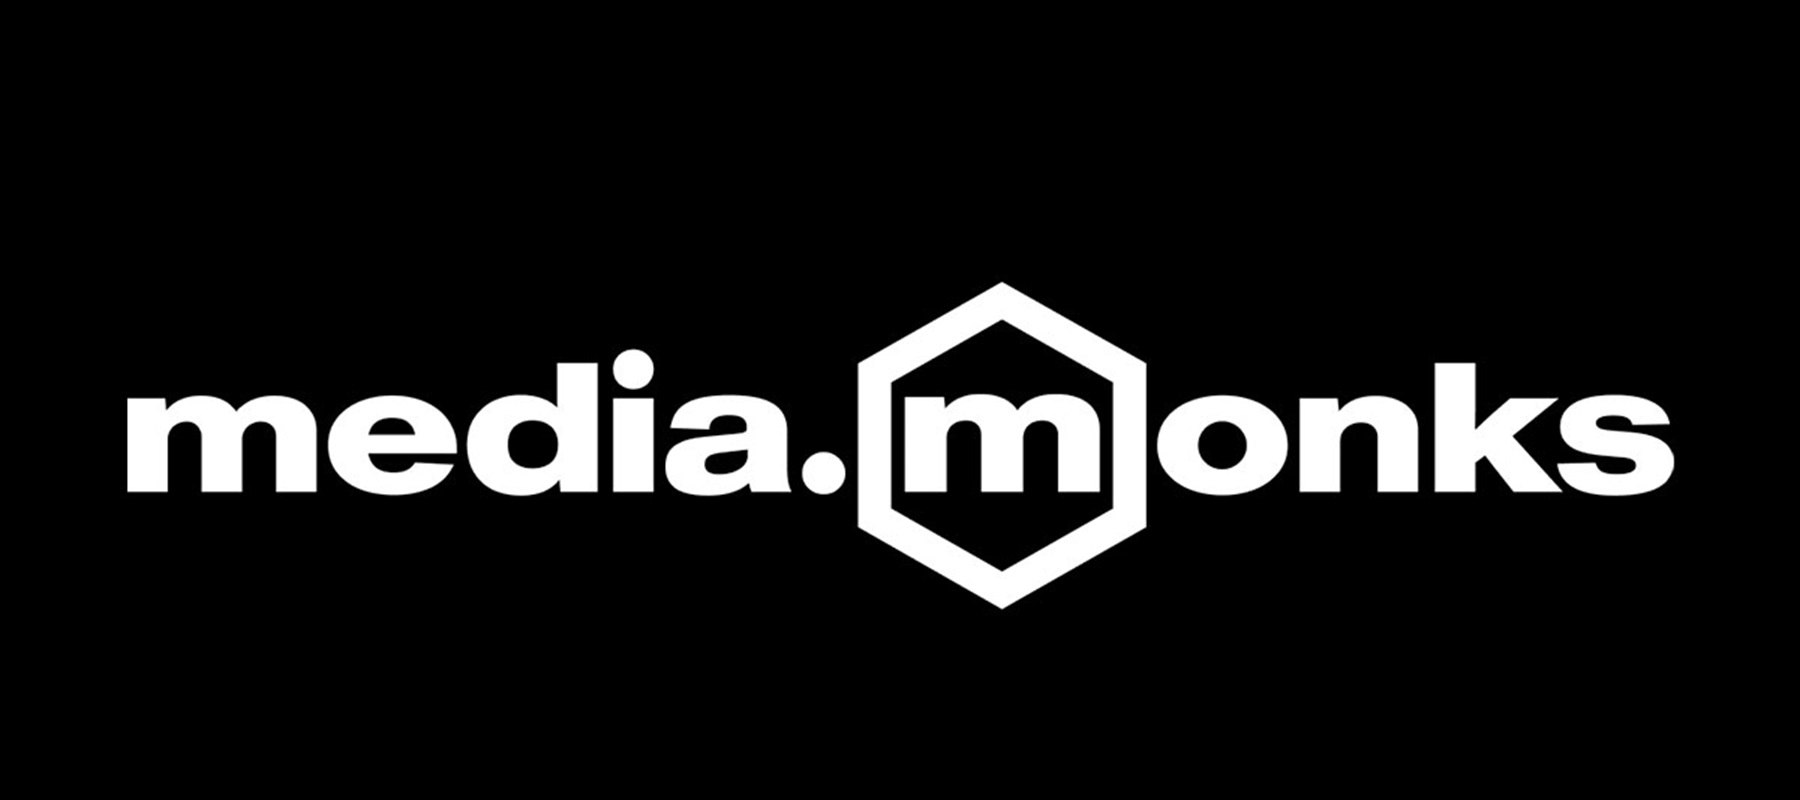 Media.Monks appoints Laurent Farci as Chief Information Officer